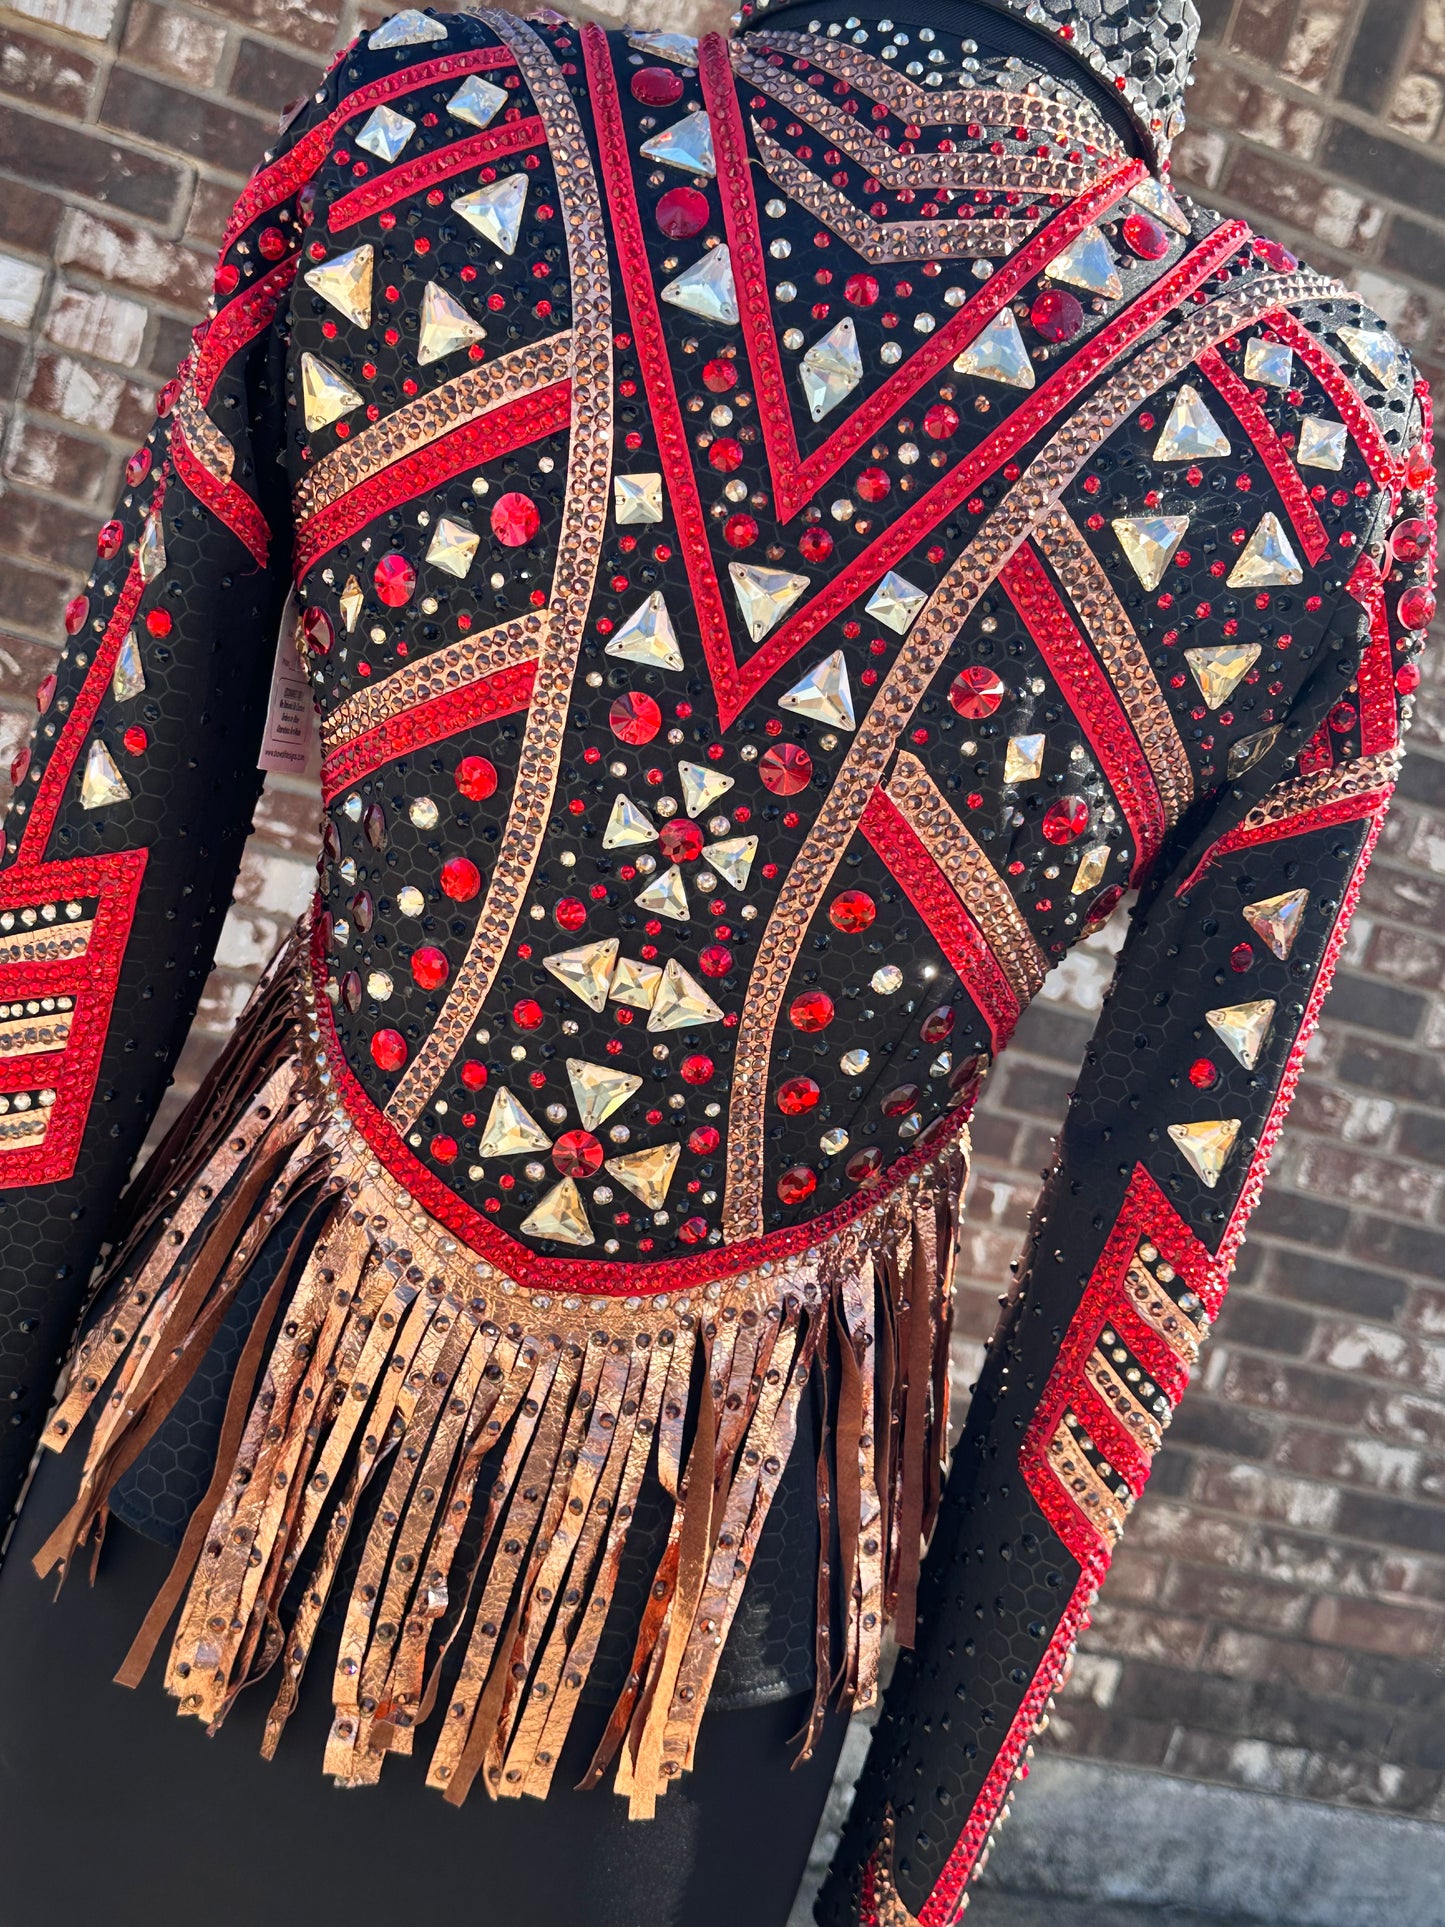 Small Rail Jacket with fringe black and red